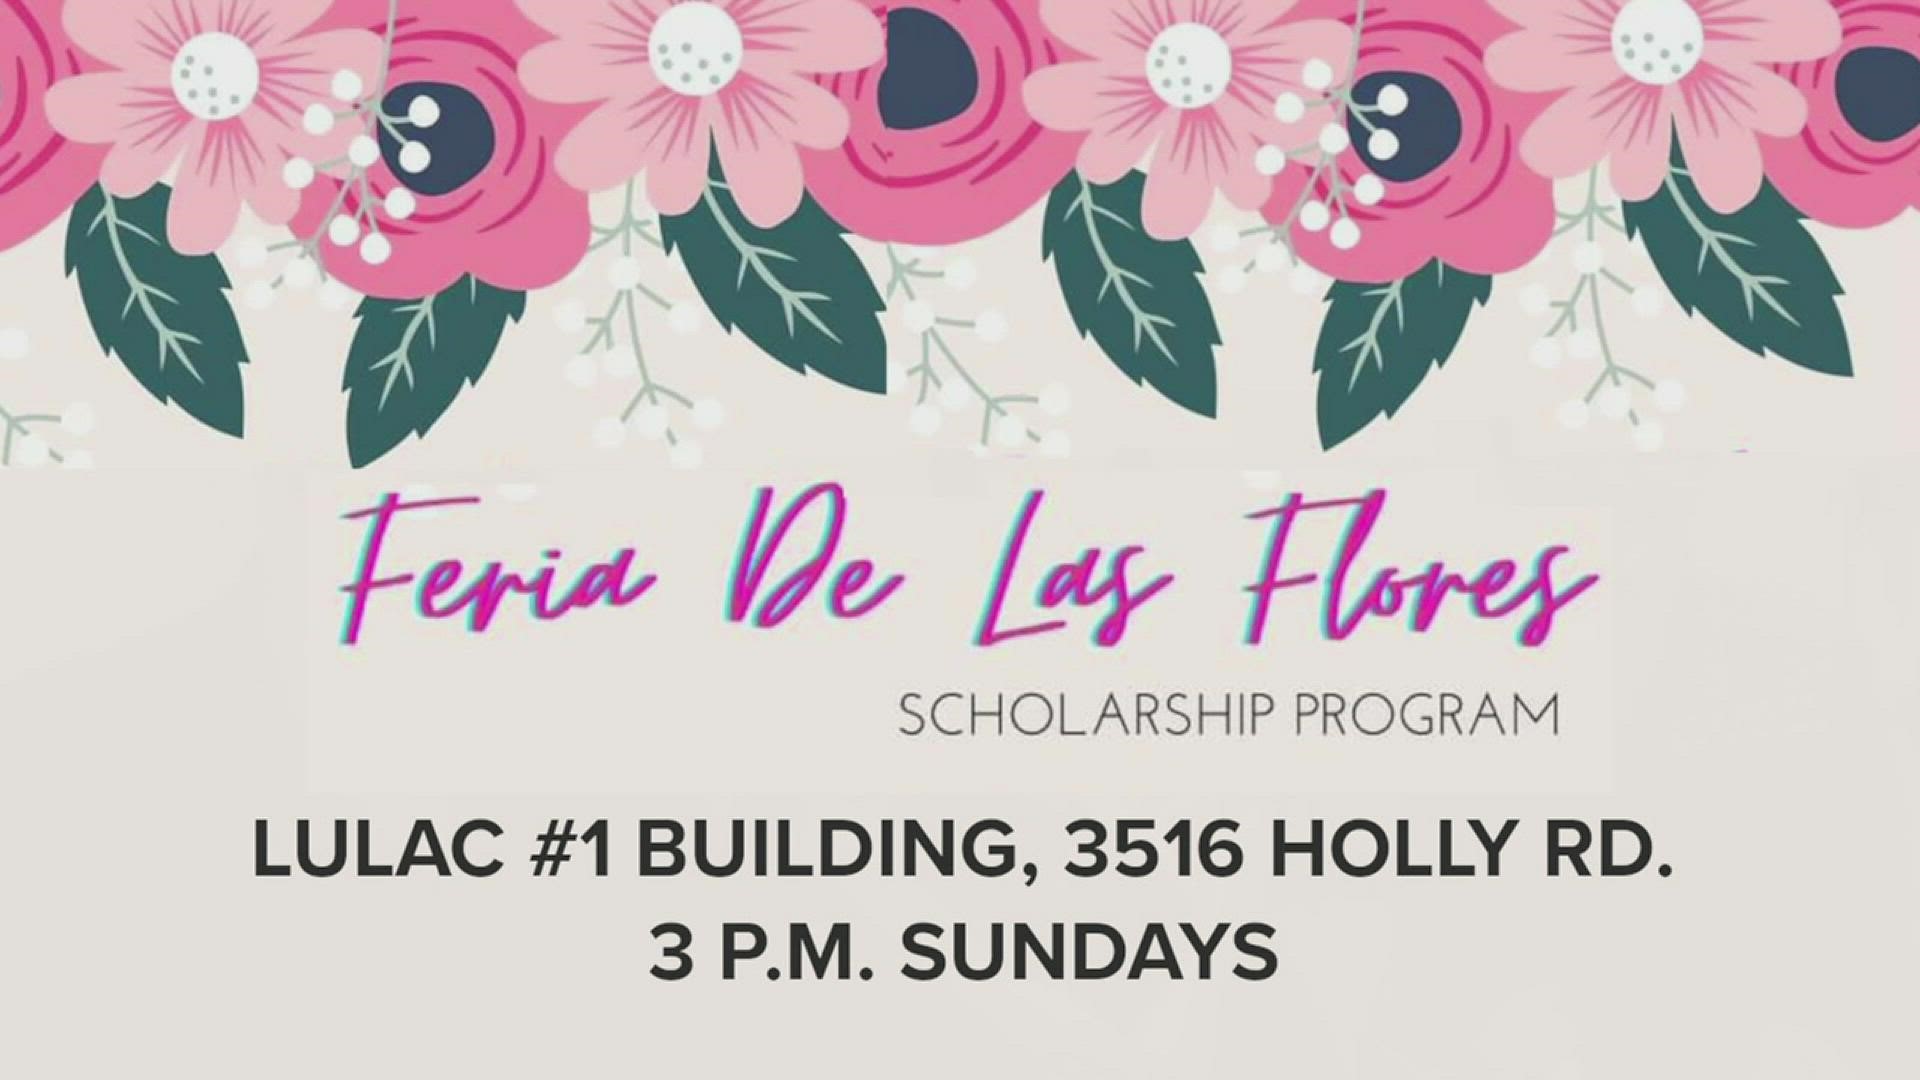 LULAC Council #1's Dr. Nick Adame, Lori Galan Garcia and 2022 Queen Brianna Gonzalez joined us live to recruit young ladies for the 2023 Feria de las Flores program.